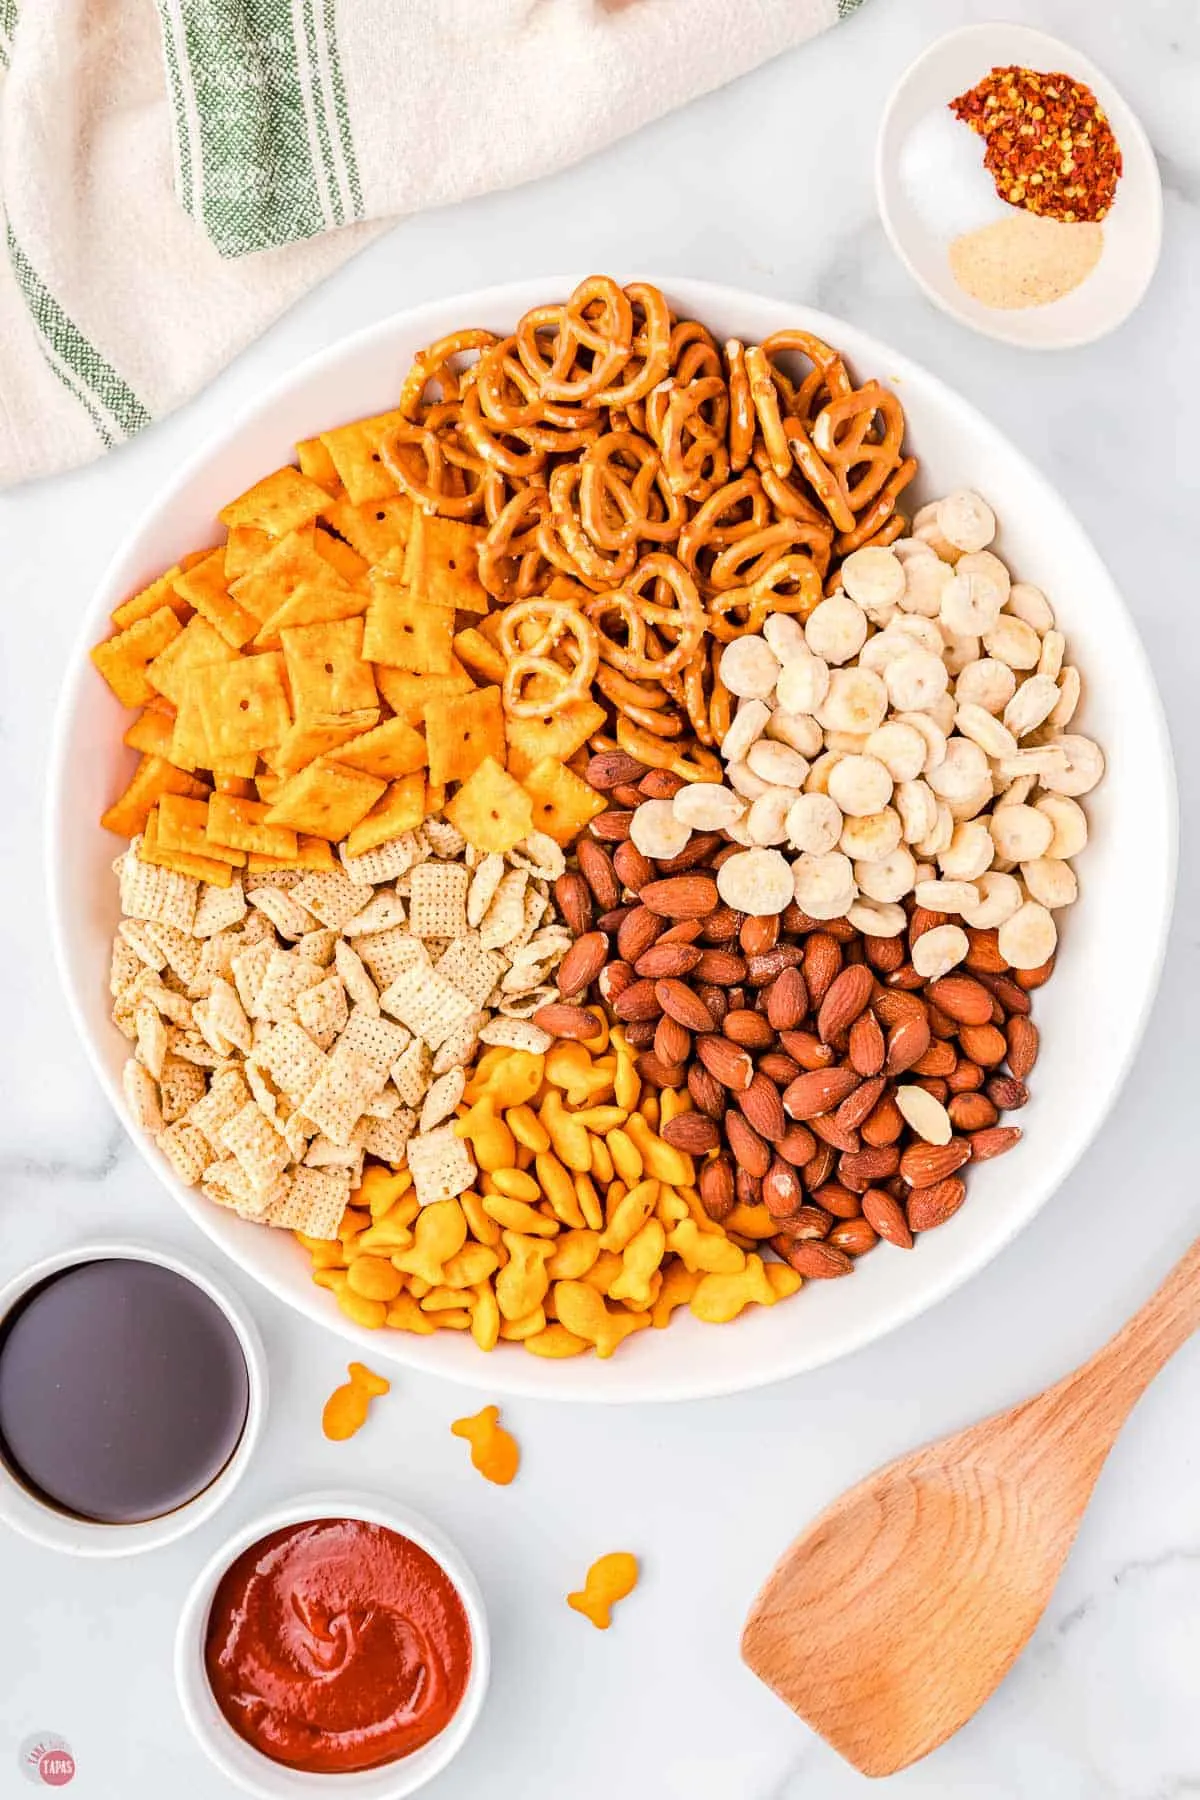 snack mix ingredients in a large microwavable bowl